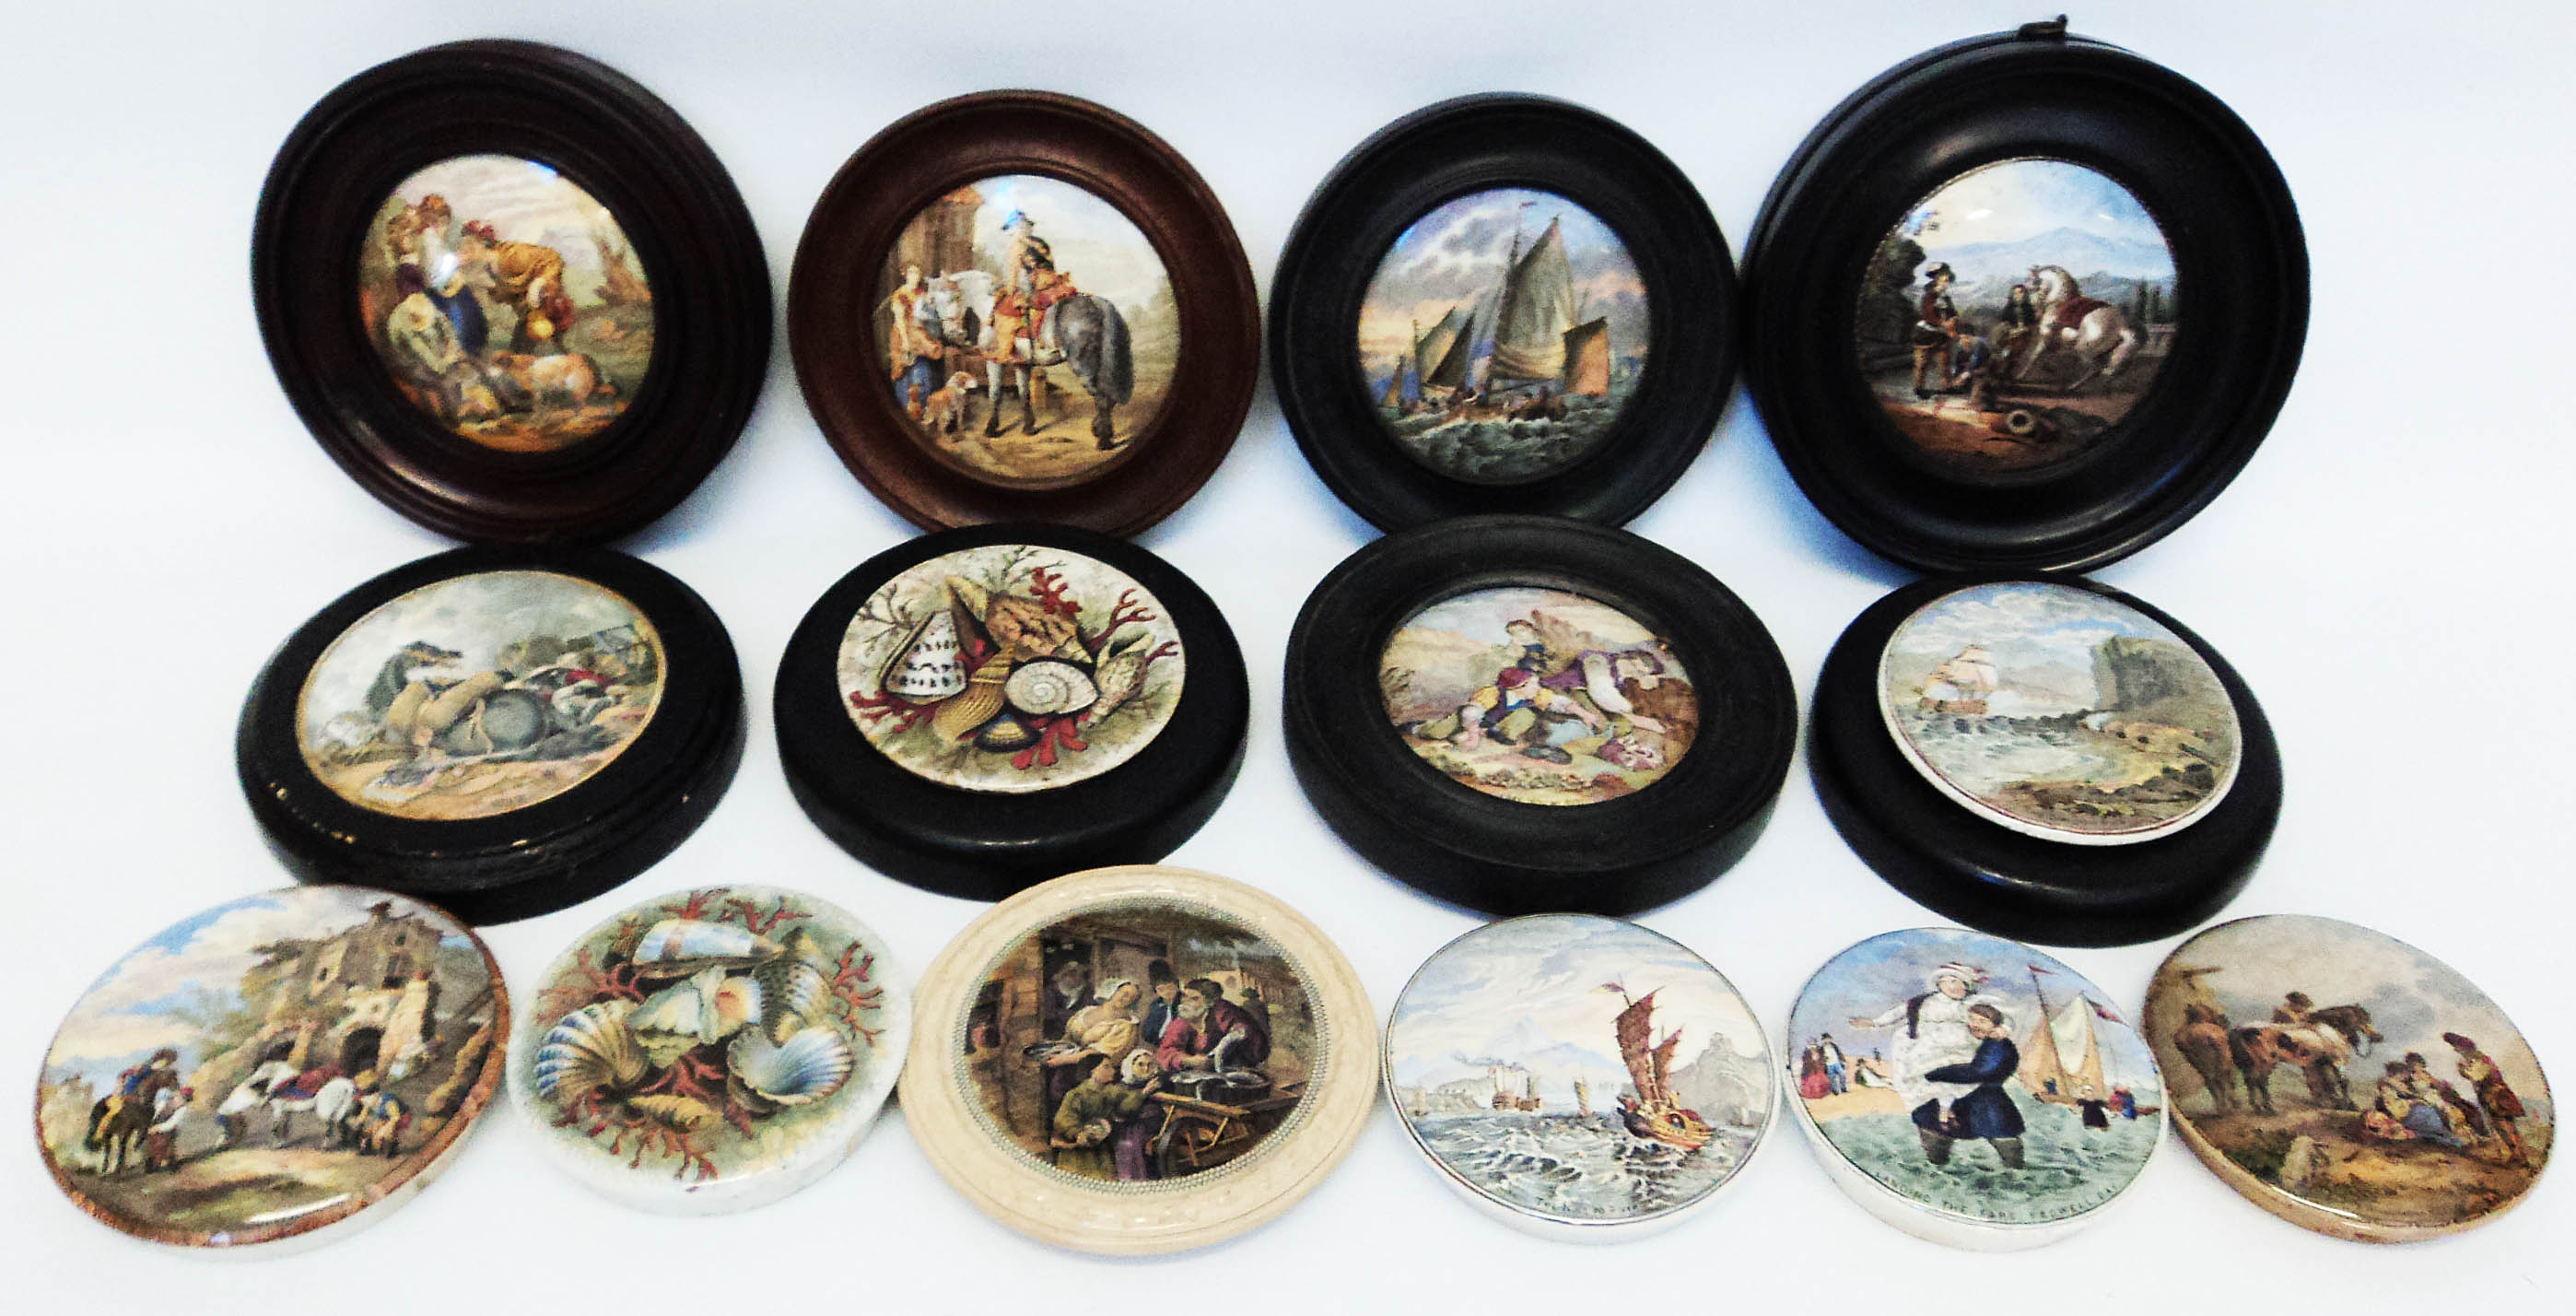 A collection of framed and unframed antique pot lids with scenic decoration, including "War", "I